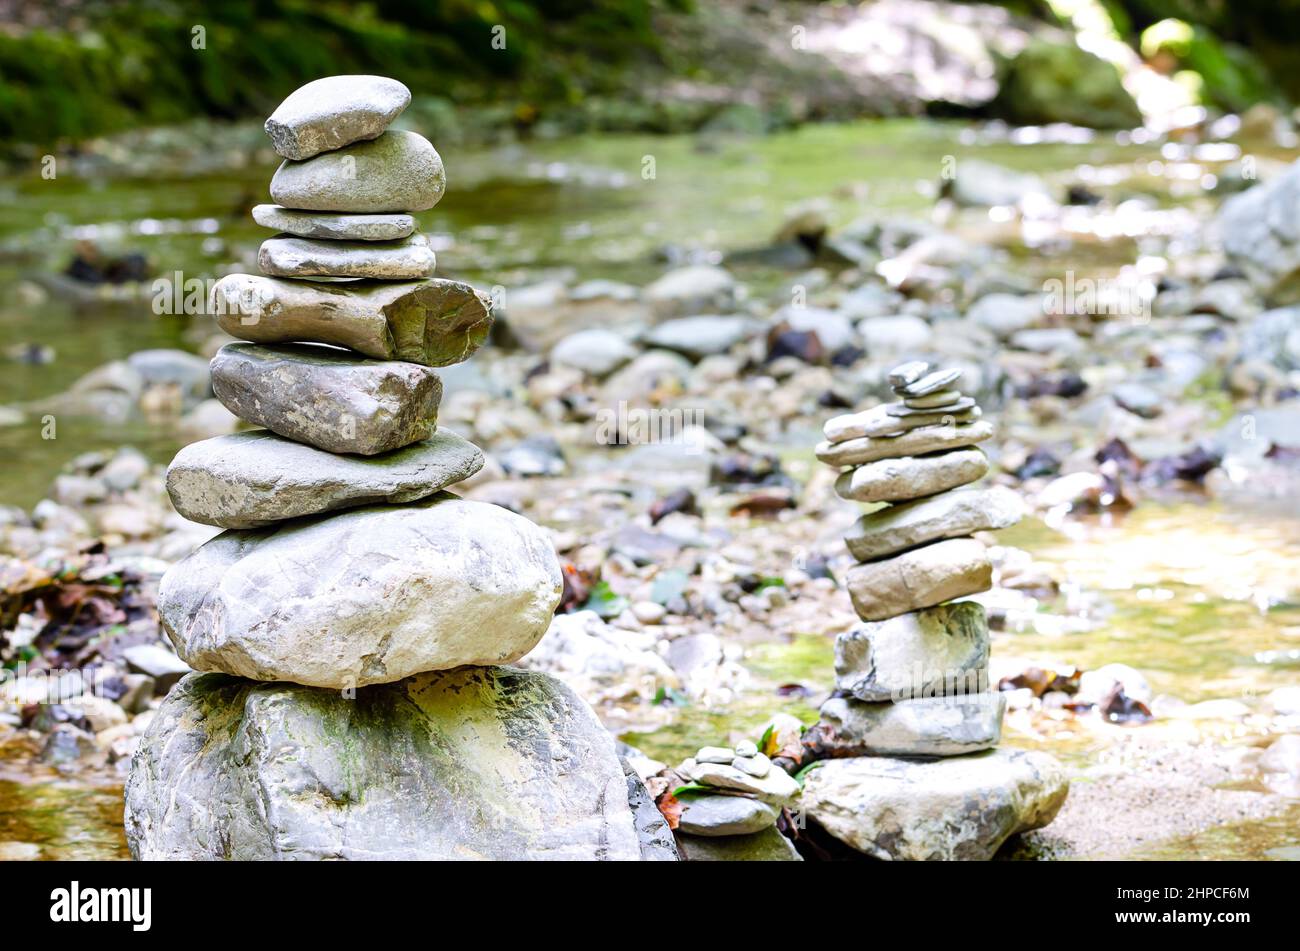 Two rock stacks in a creek bed. Piles of stacked rocks, balancing on big rocks in a bed of a wild stream. Rocks laid flat upon each other. Stock Photo